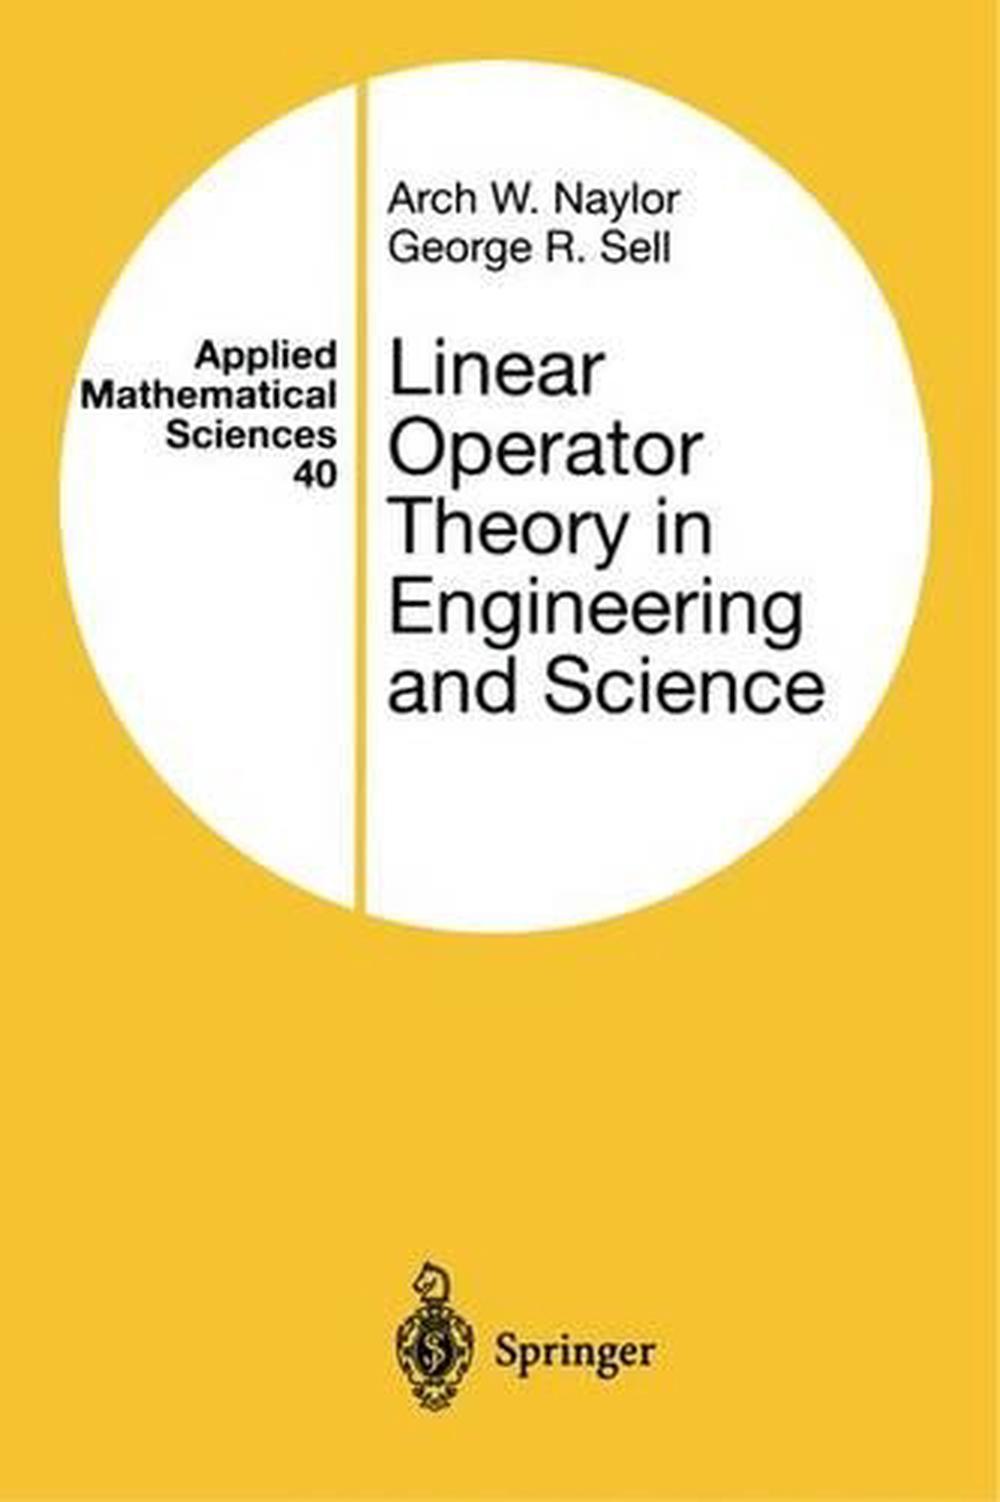 Linear Operator Theory in Engineering and Science by Arch W. Naylor (English) Pa 9780387950013